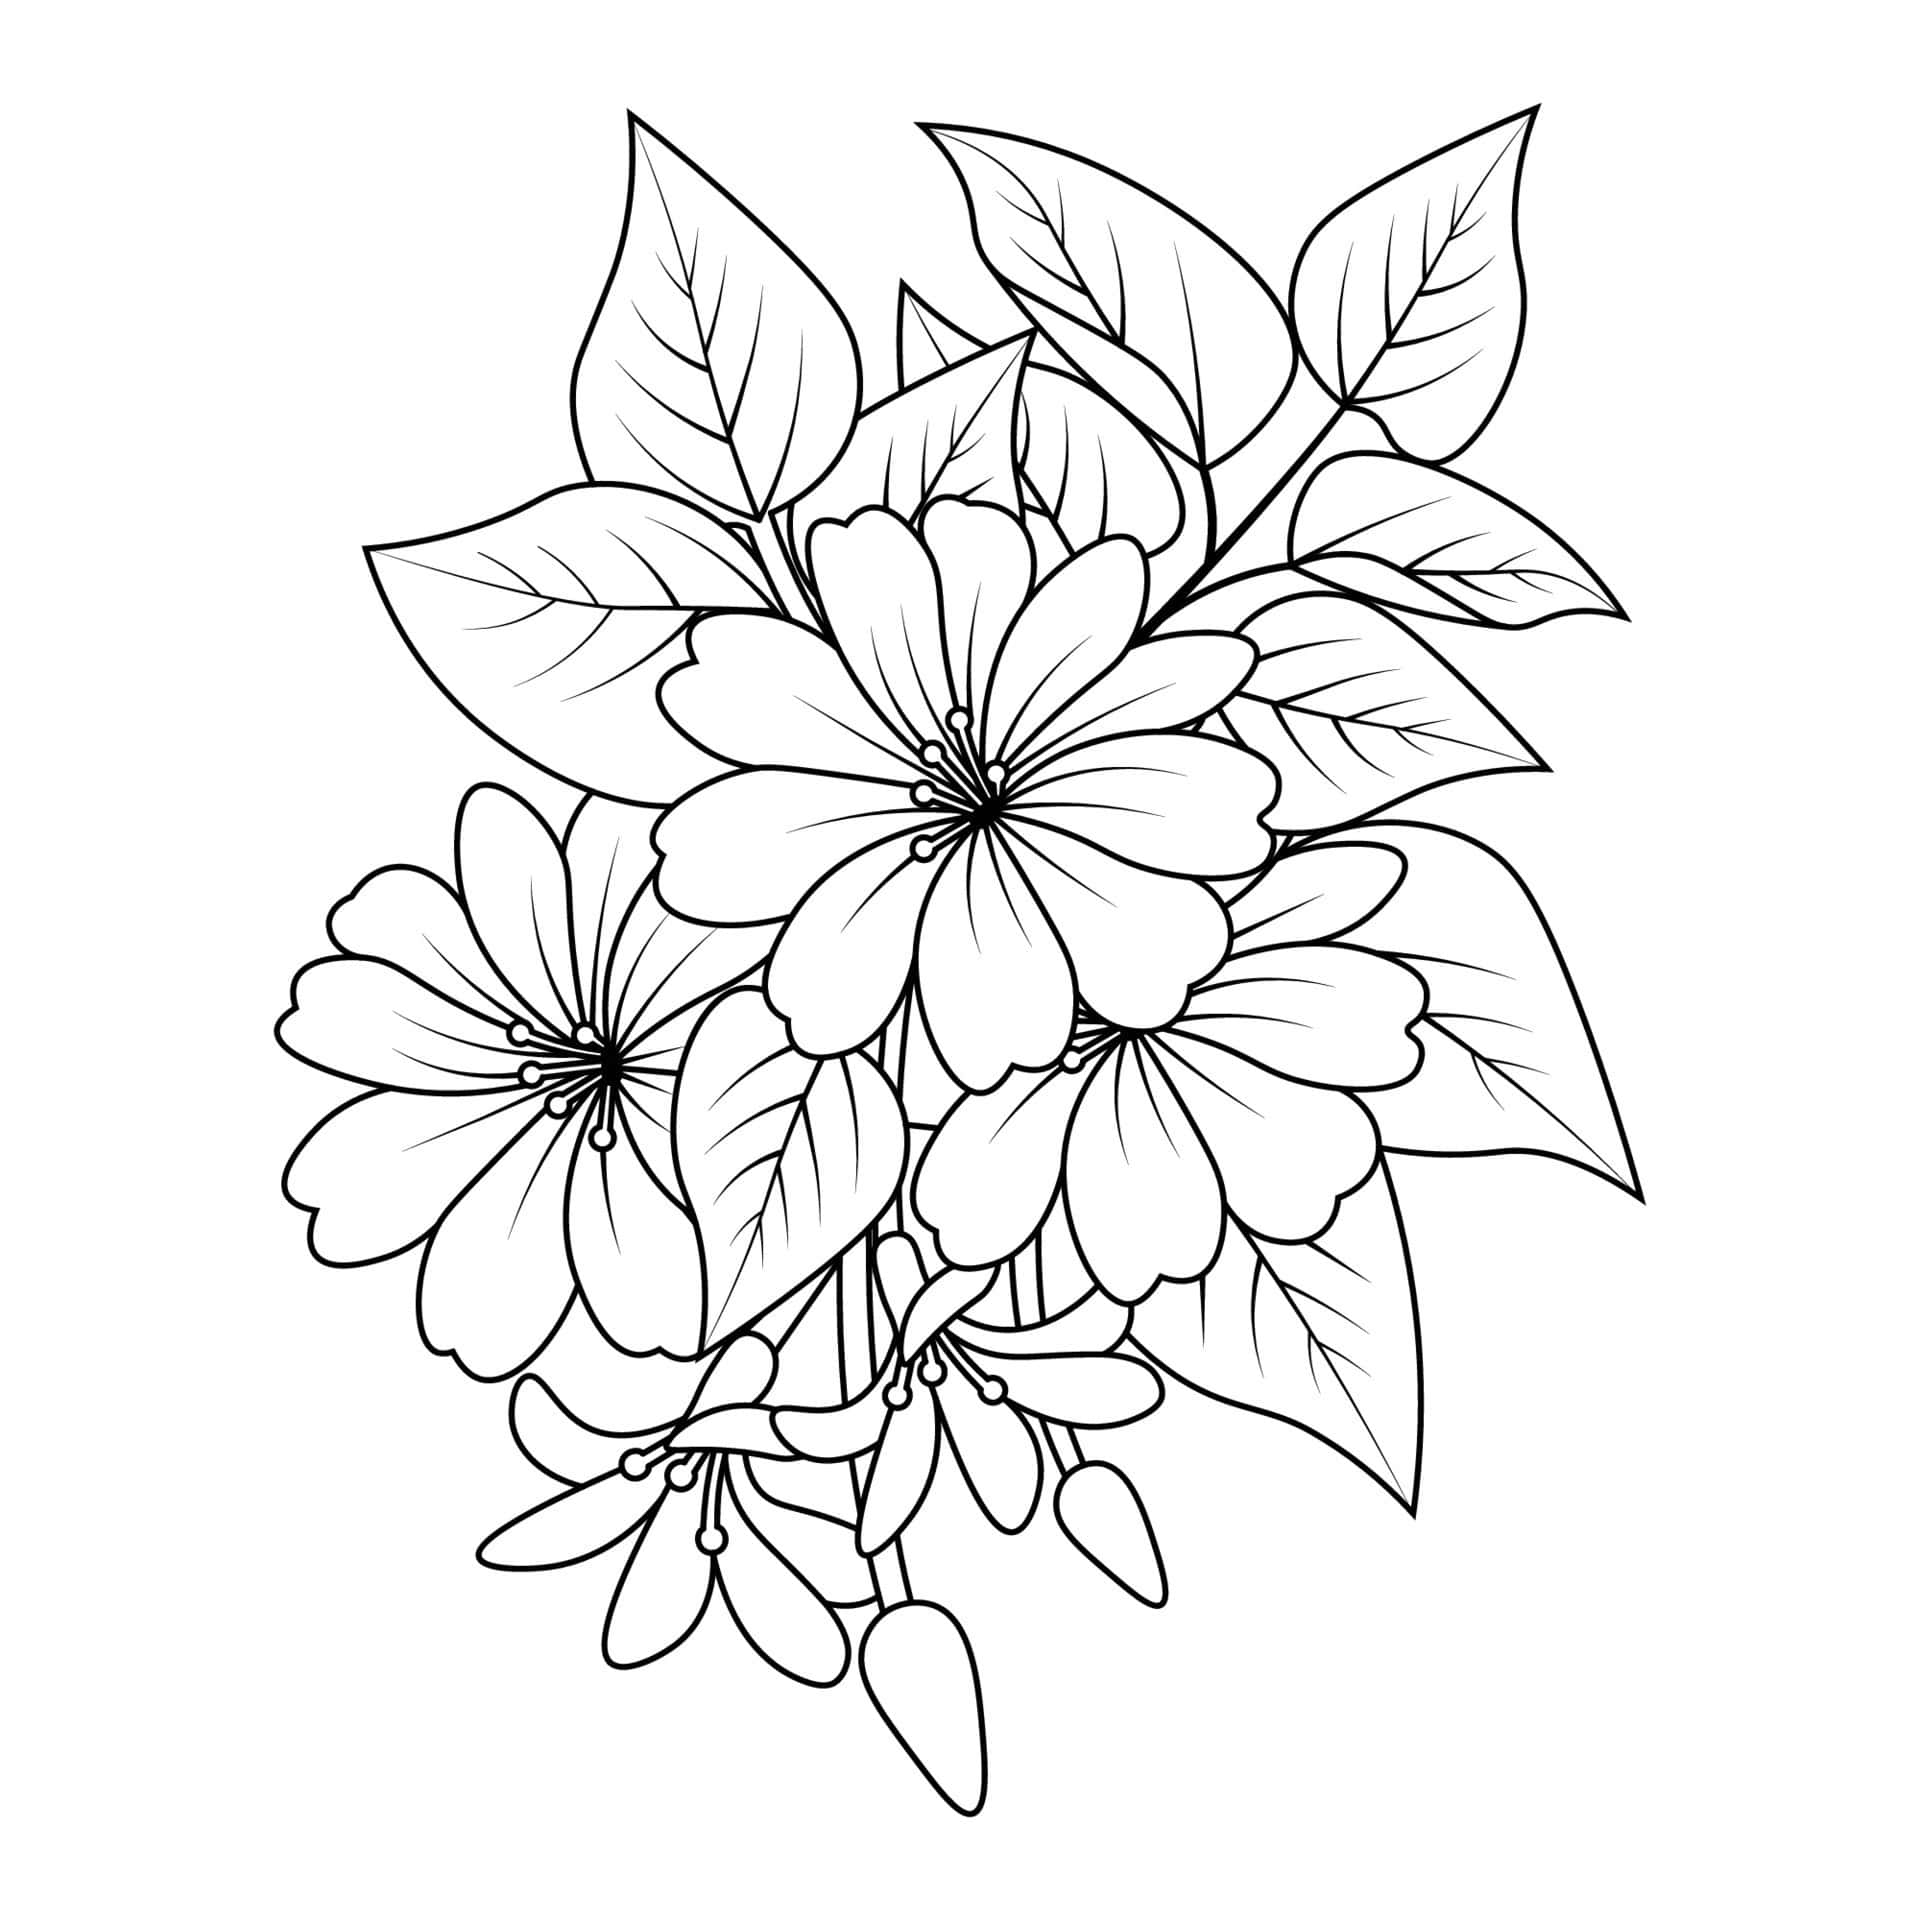 Bright and Colorful - Enjoy the Beauty of Flower Coloring Pictures